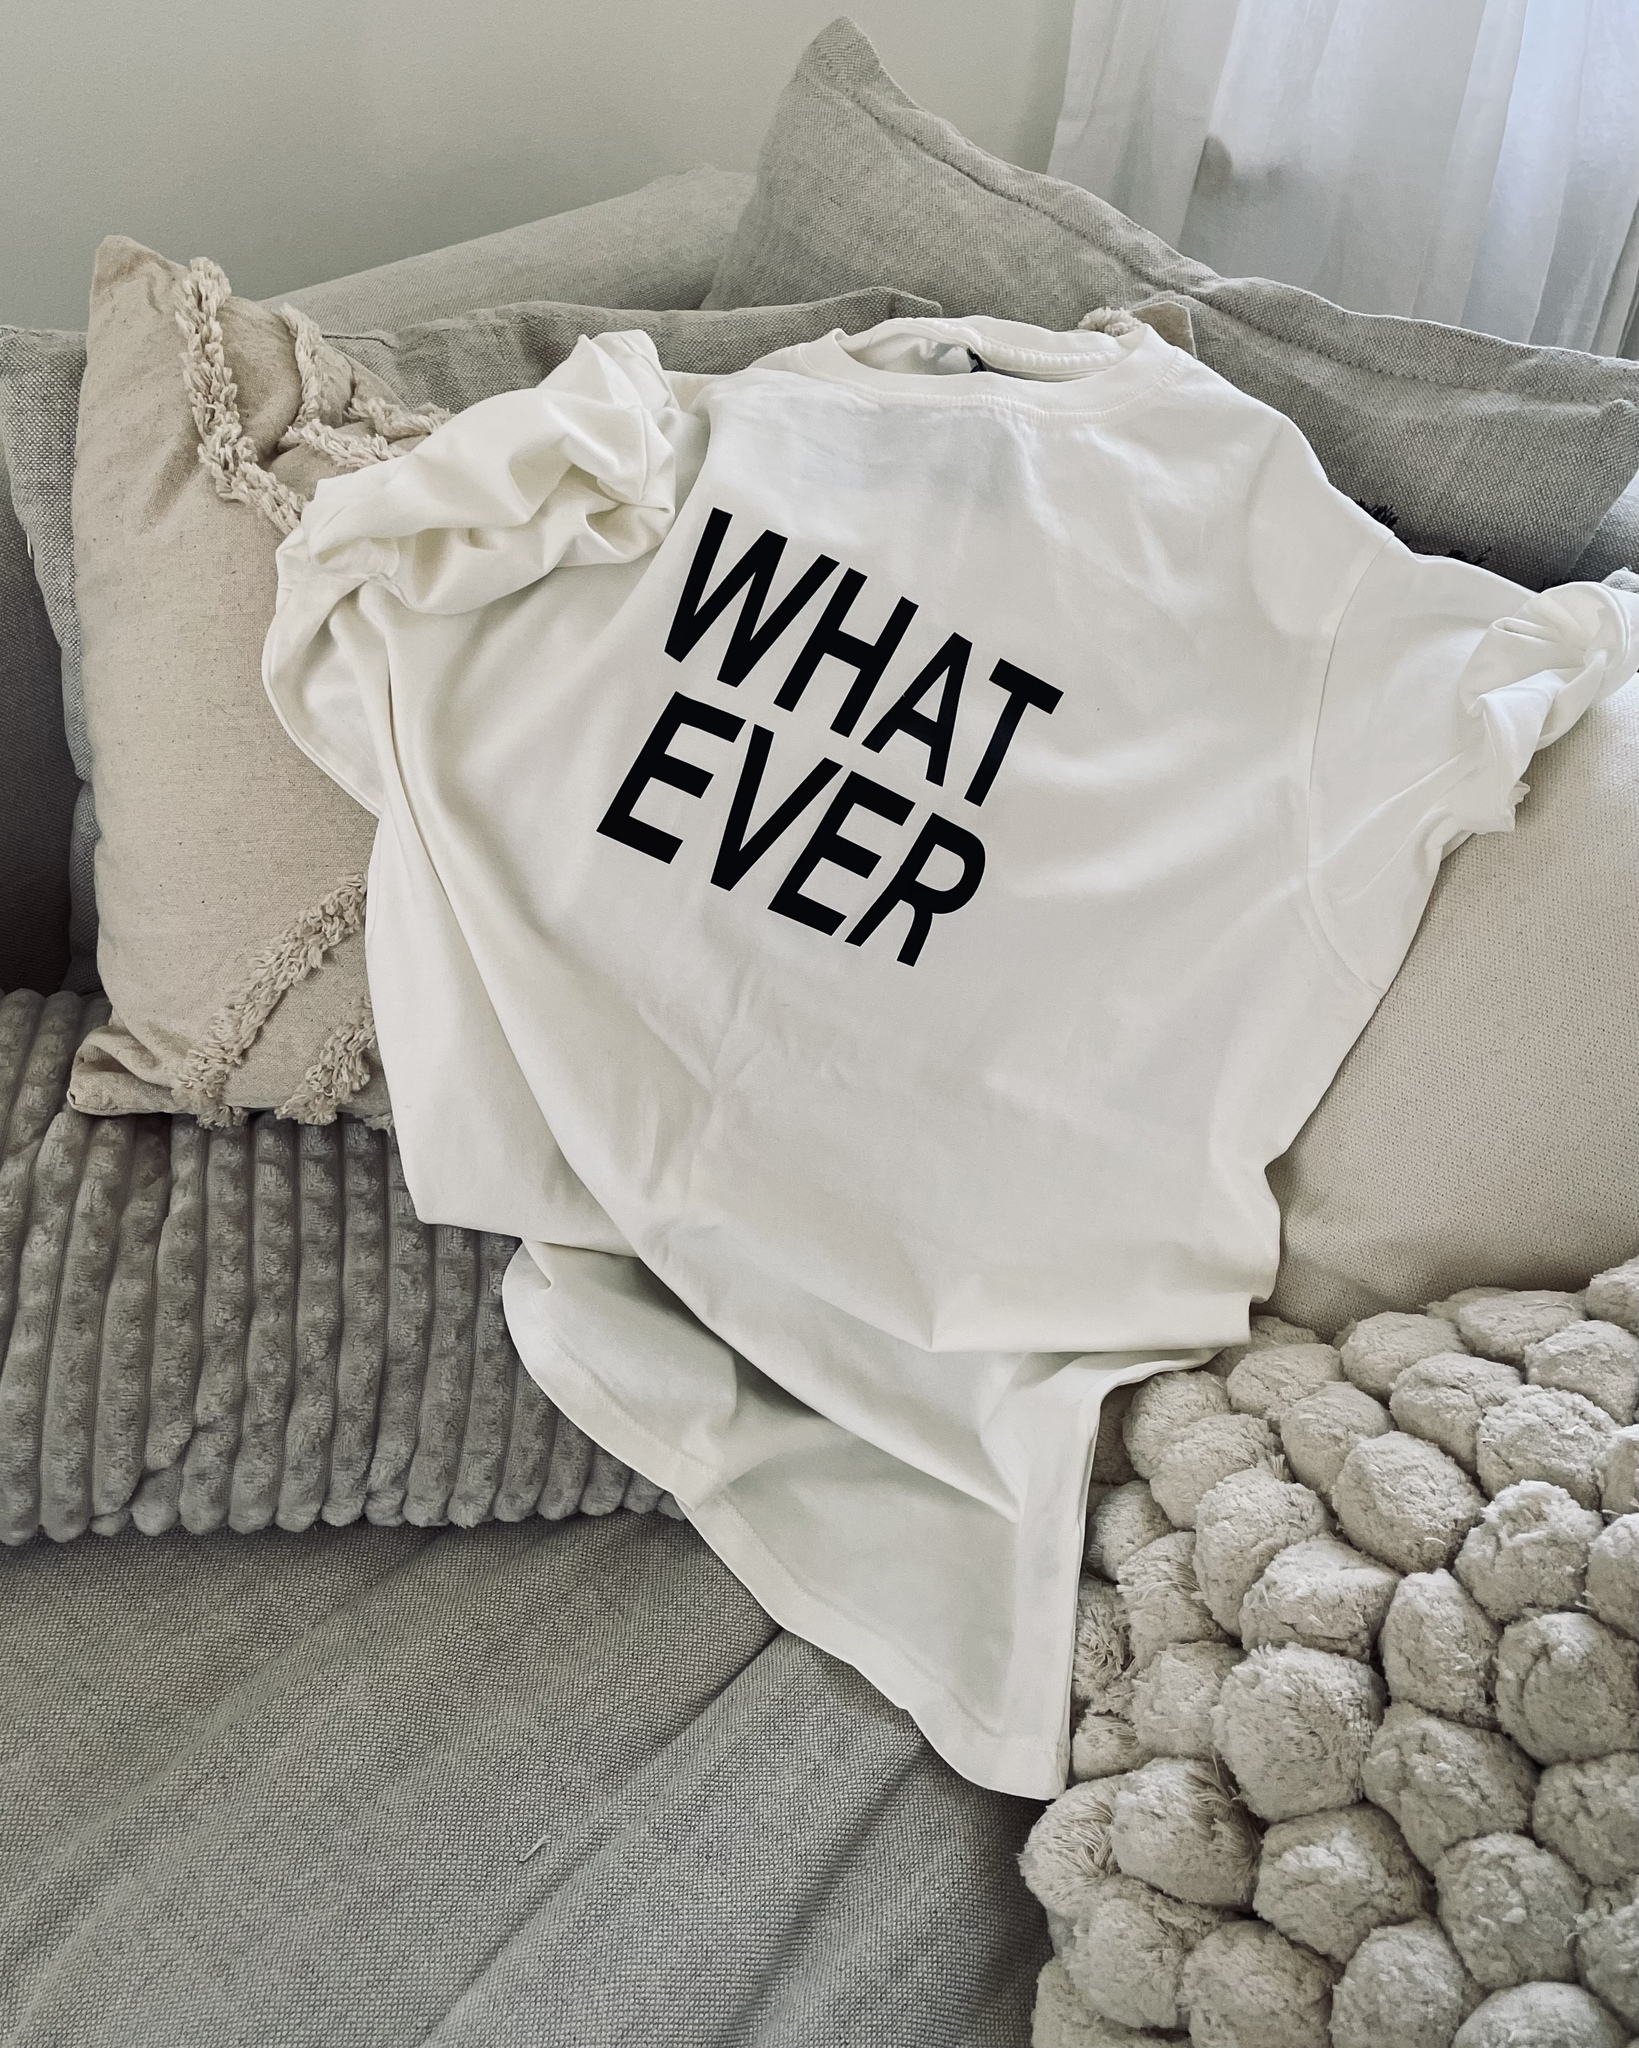 WHAT EVER - UNISEX TEE - STONE WASHED WHITE